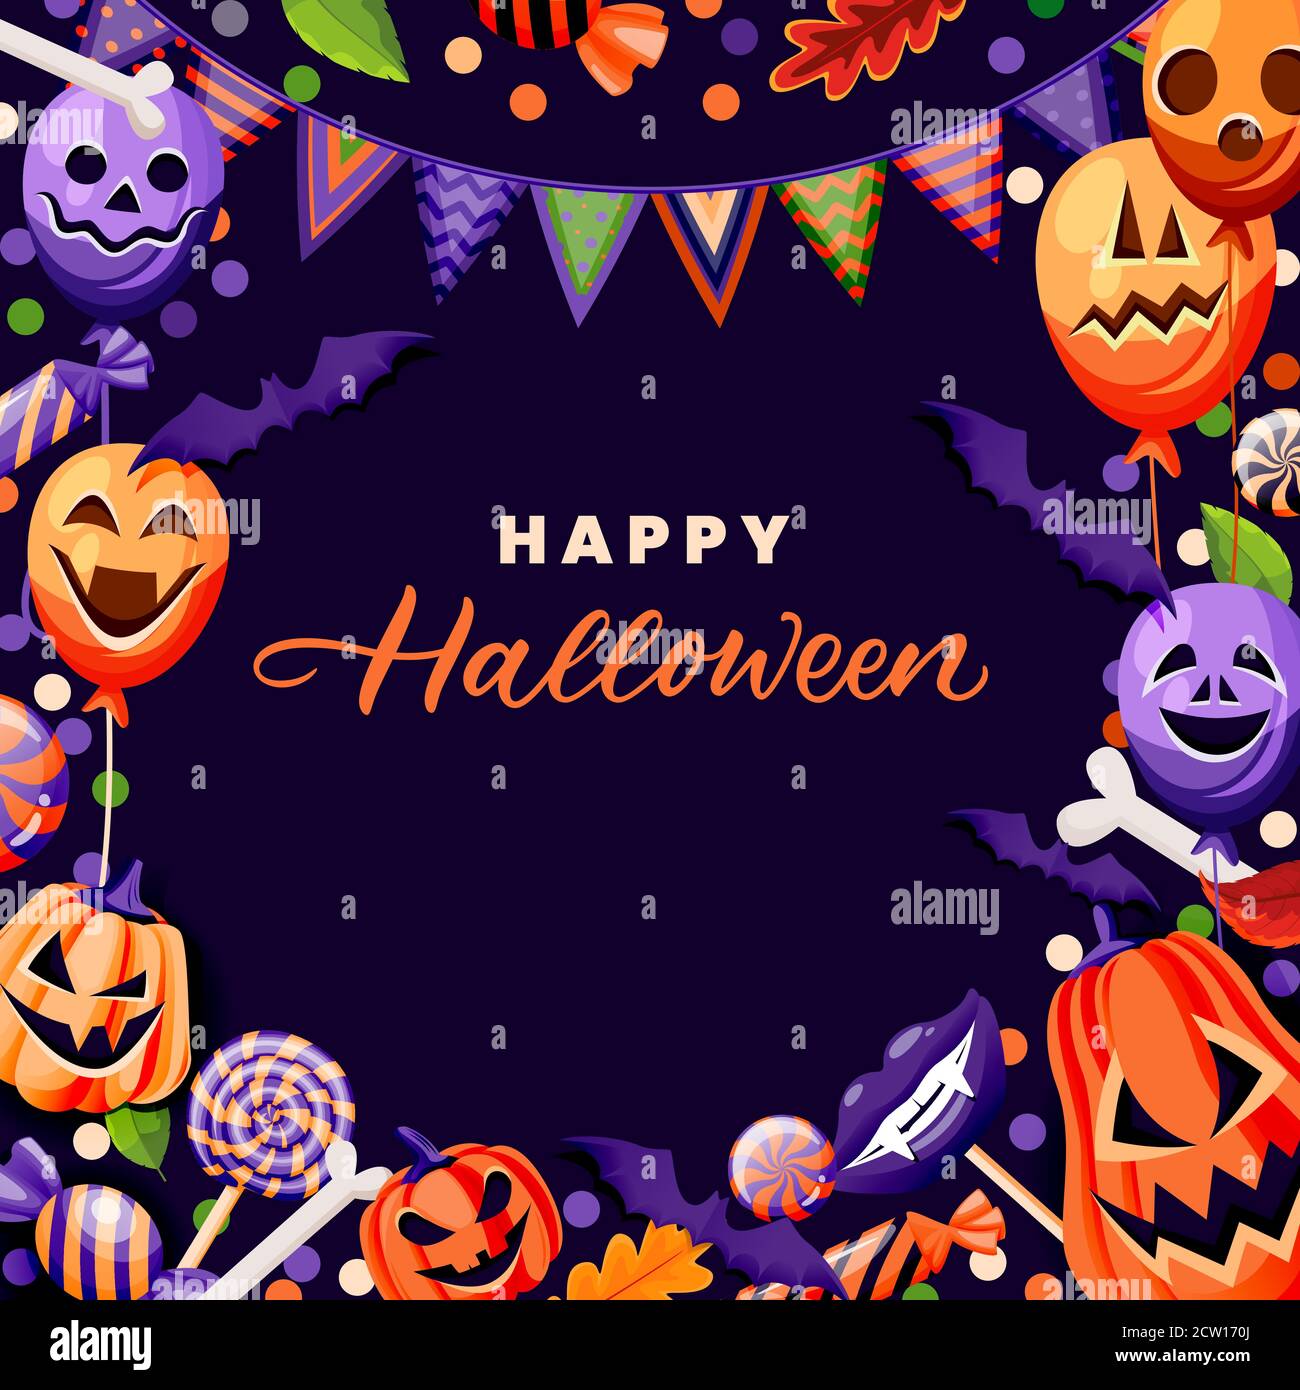 Halloween poster, banner, party invitation design template. Holiday frame with horror decoration. Balloons with grinning faces, pumpkin lanterns, bats Stock Vector